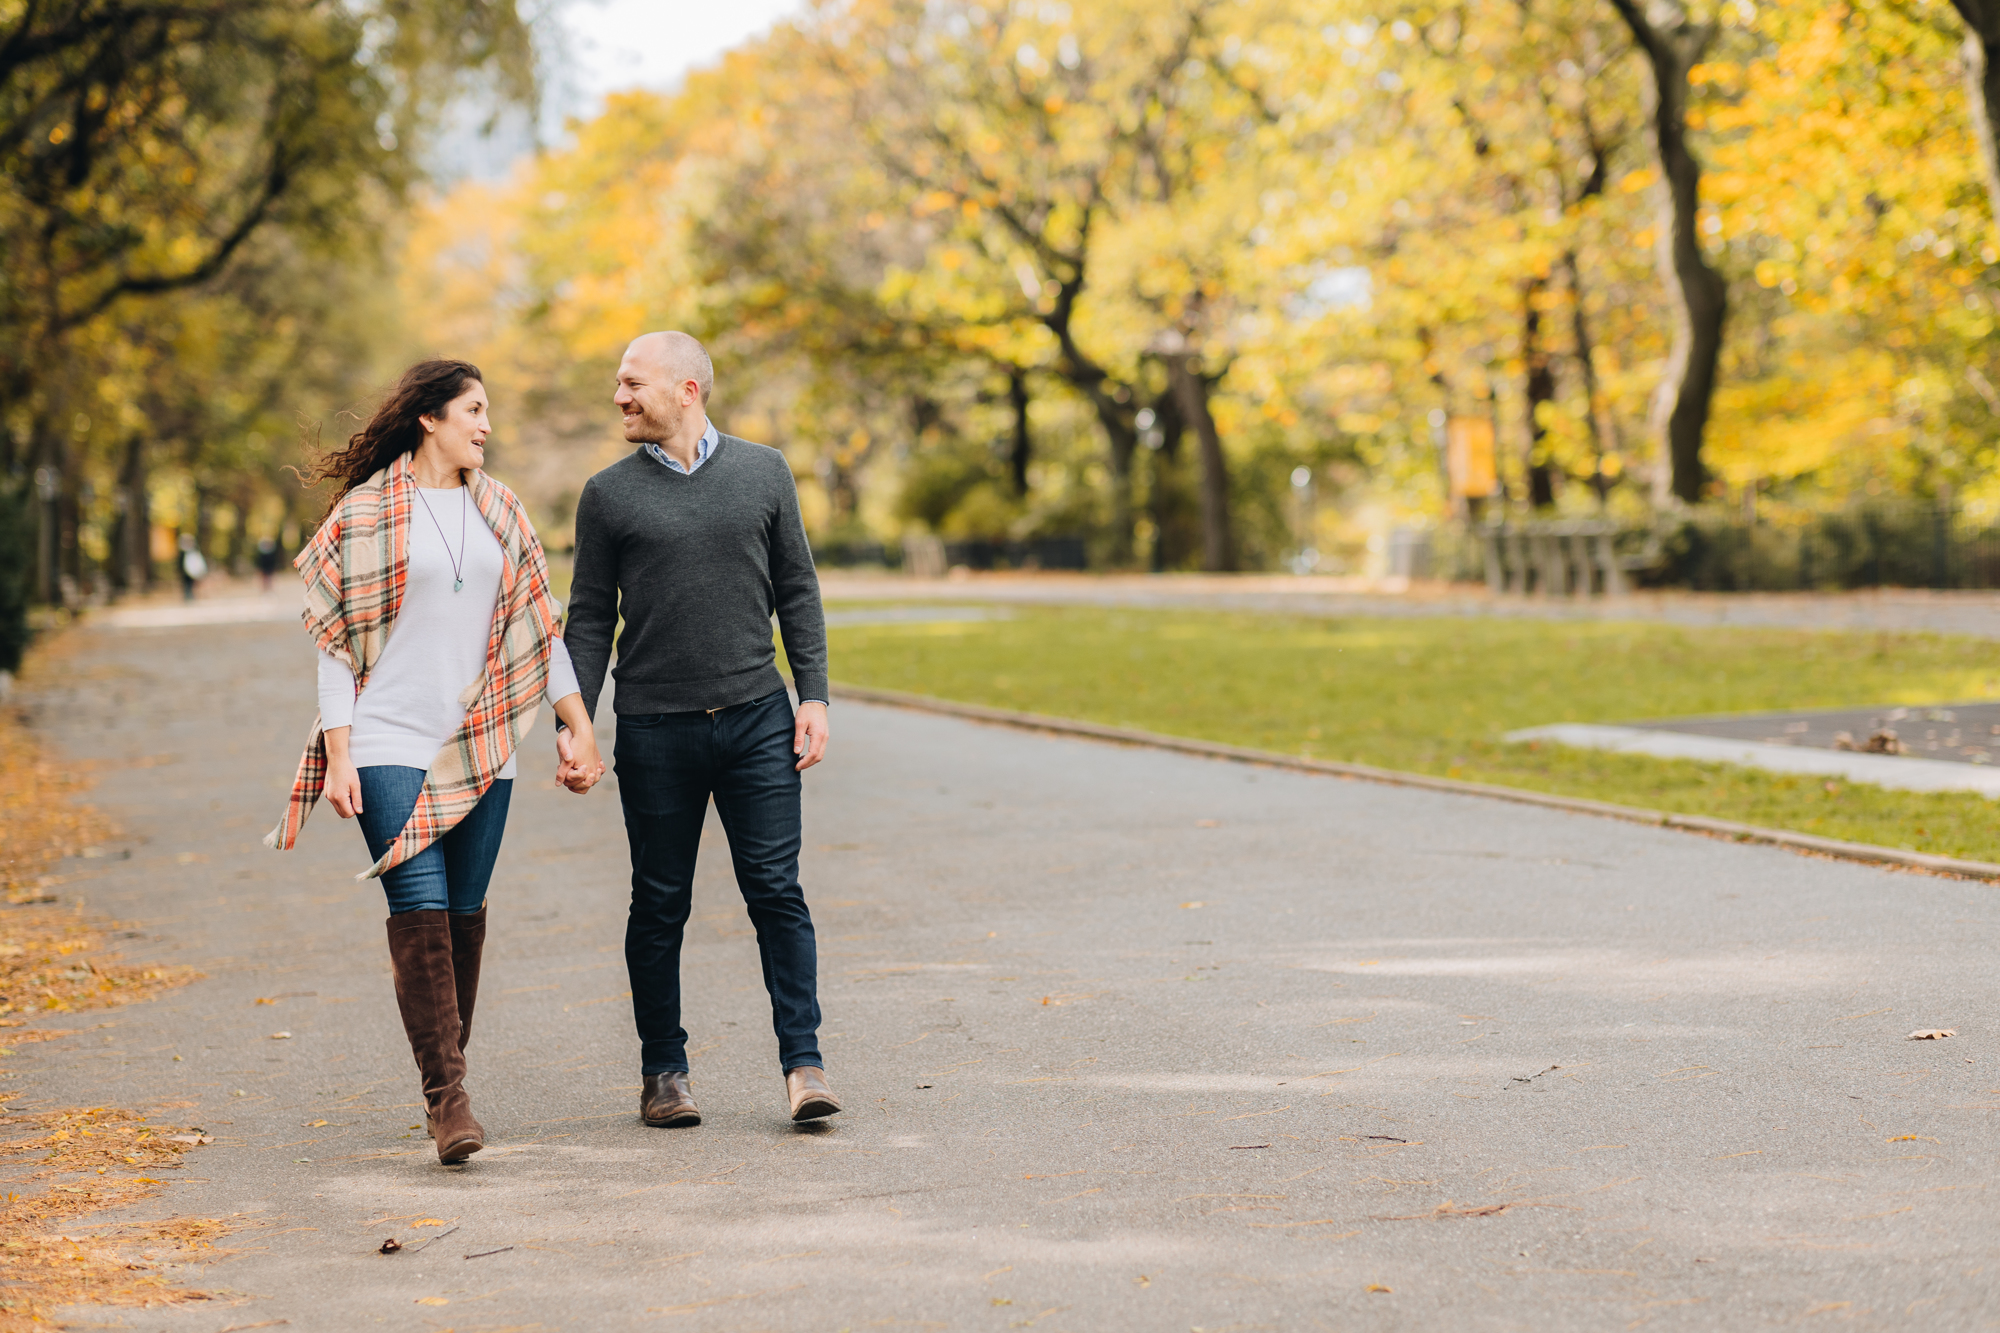 Picturesque Fall Riverside Park Engagement Photography